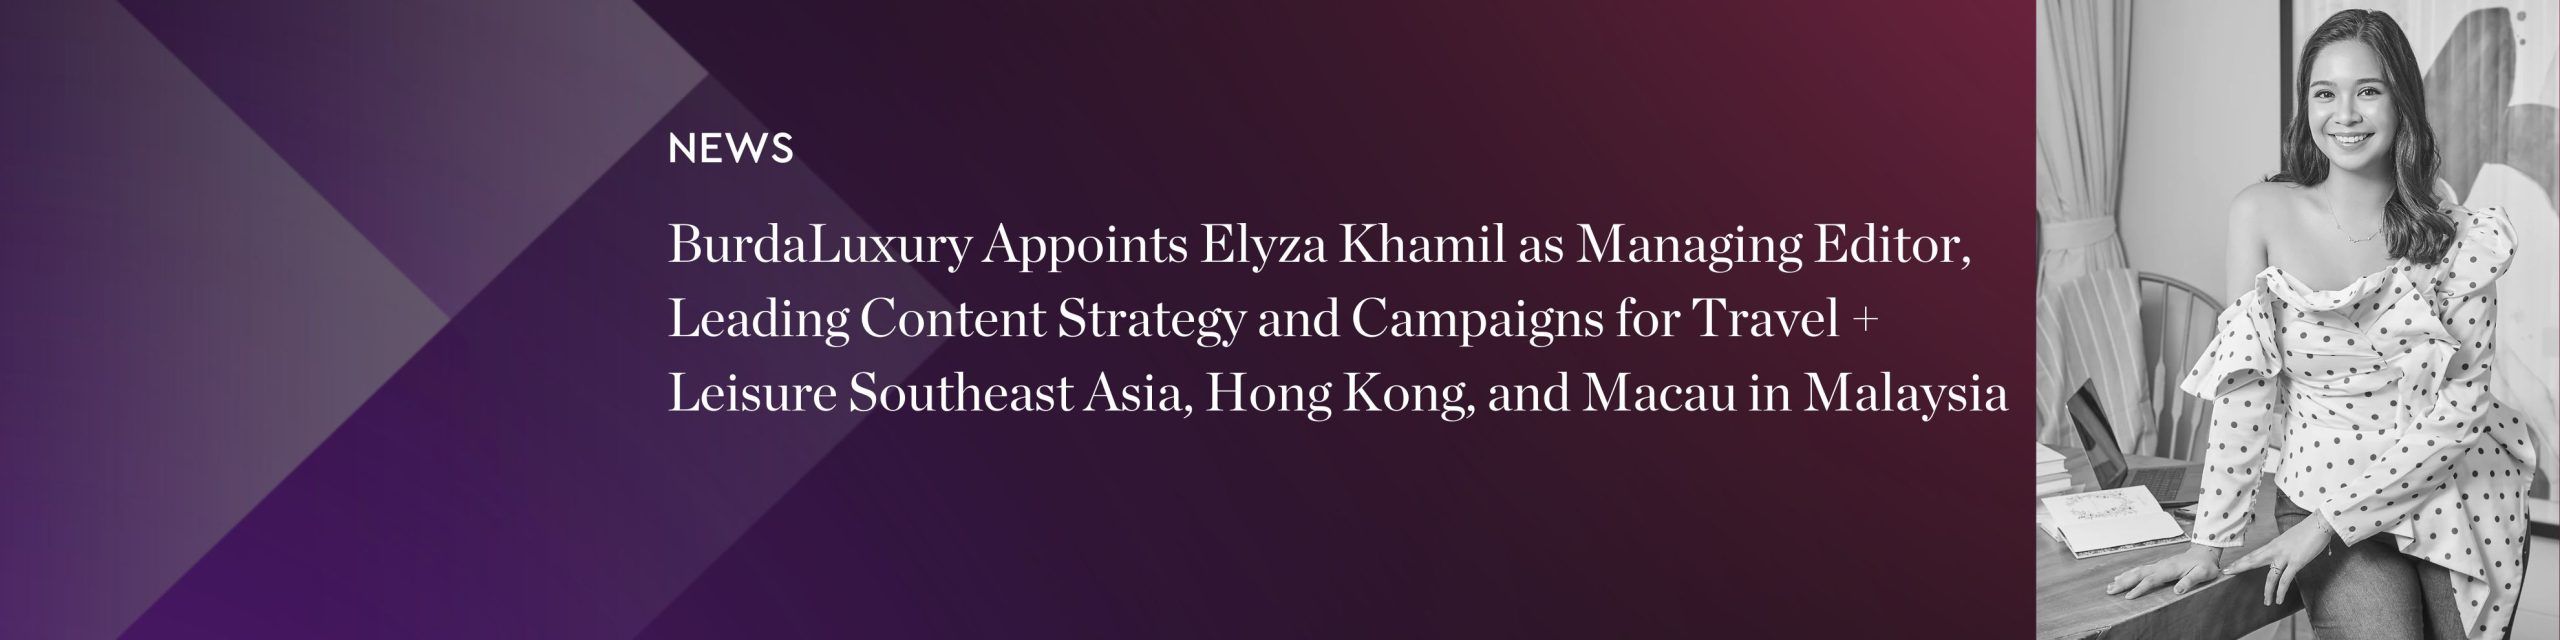 BurdaLuxury Appoints Elyza Khamil as Managing Editor, Leading Content Strategy and Campaigns for Travel + Leisure Southeast Asia, Hong Kong, and Macau in Malaysia